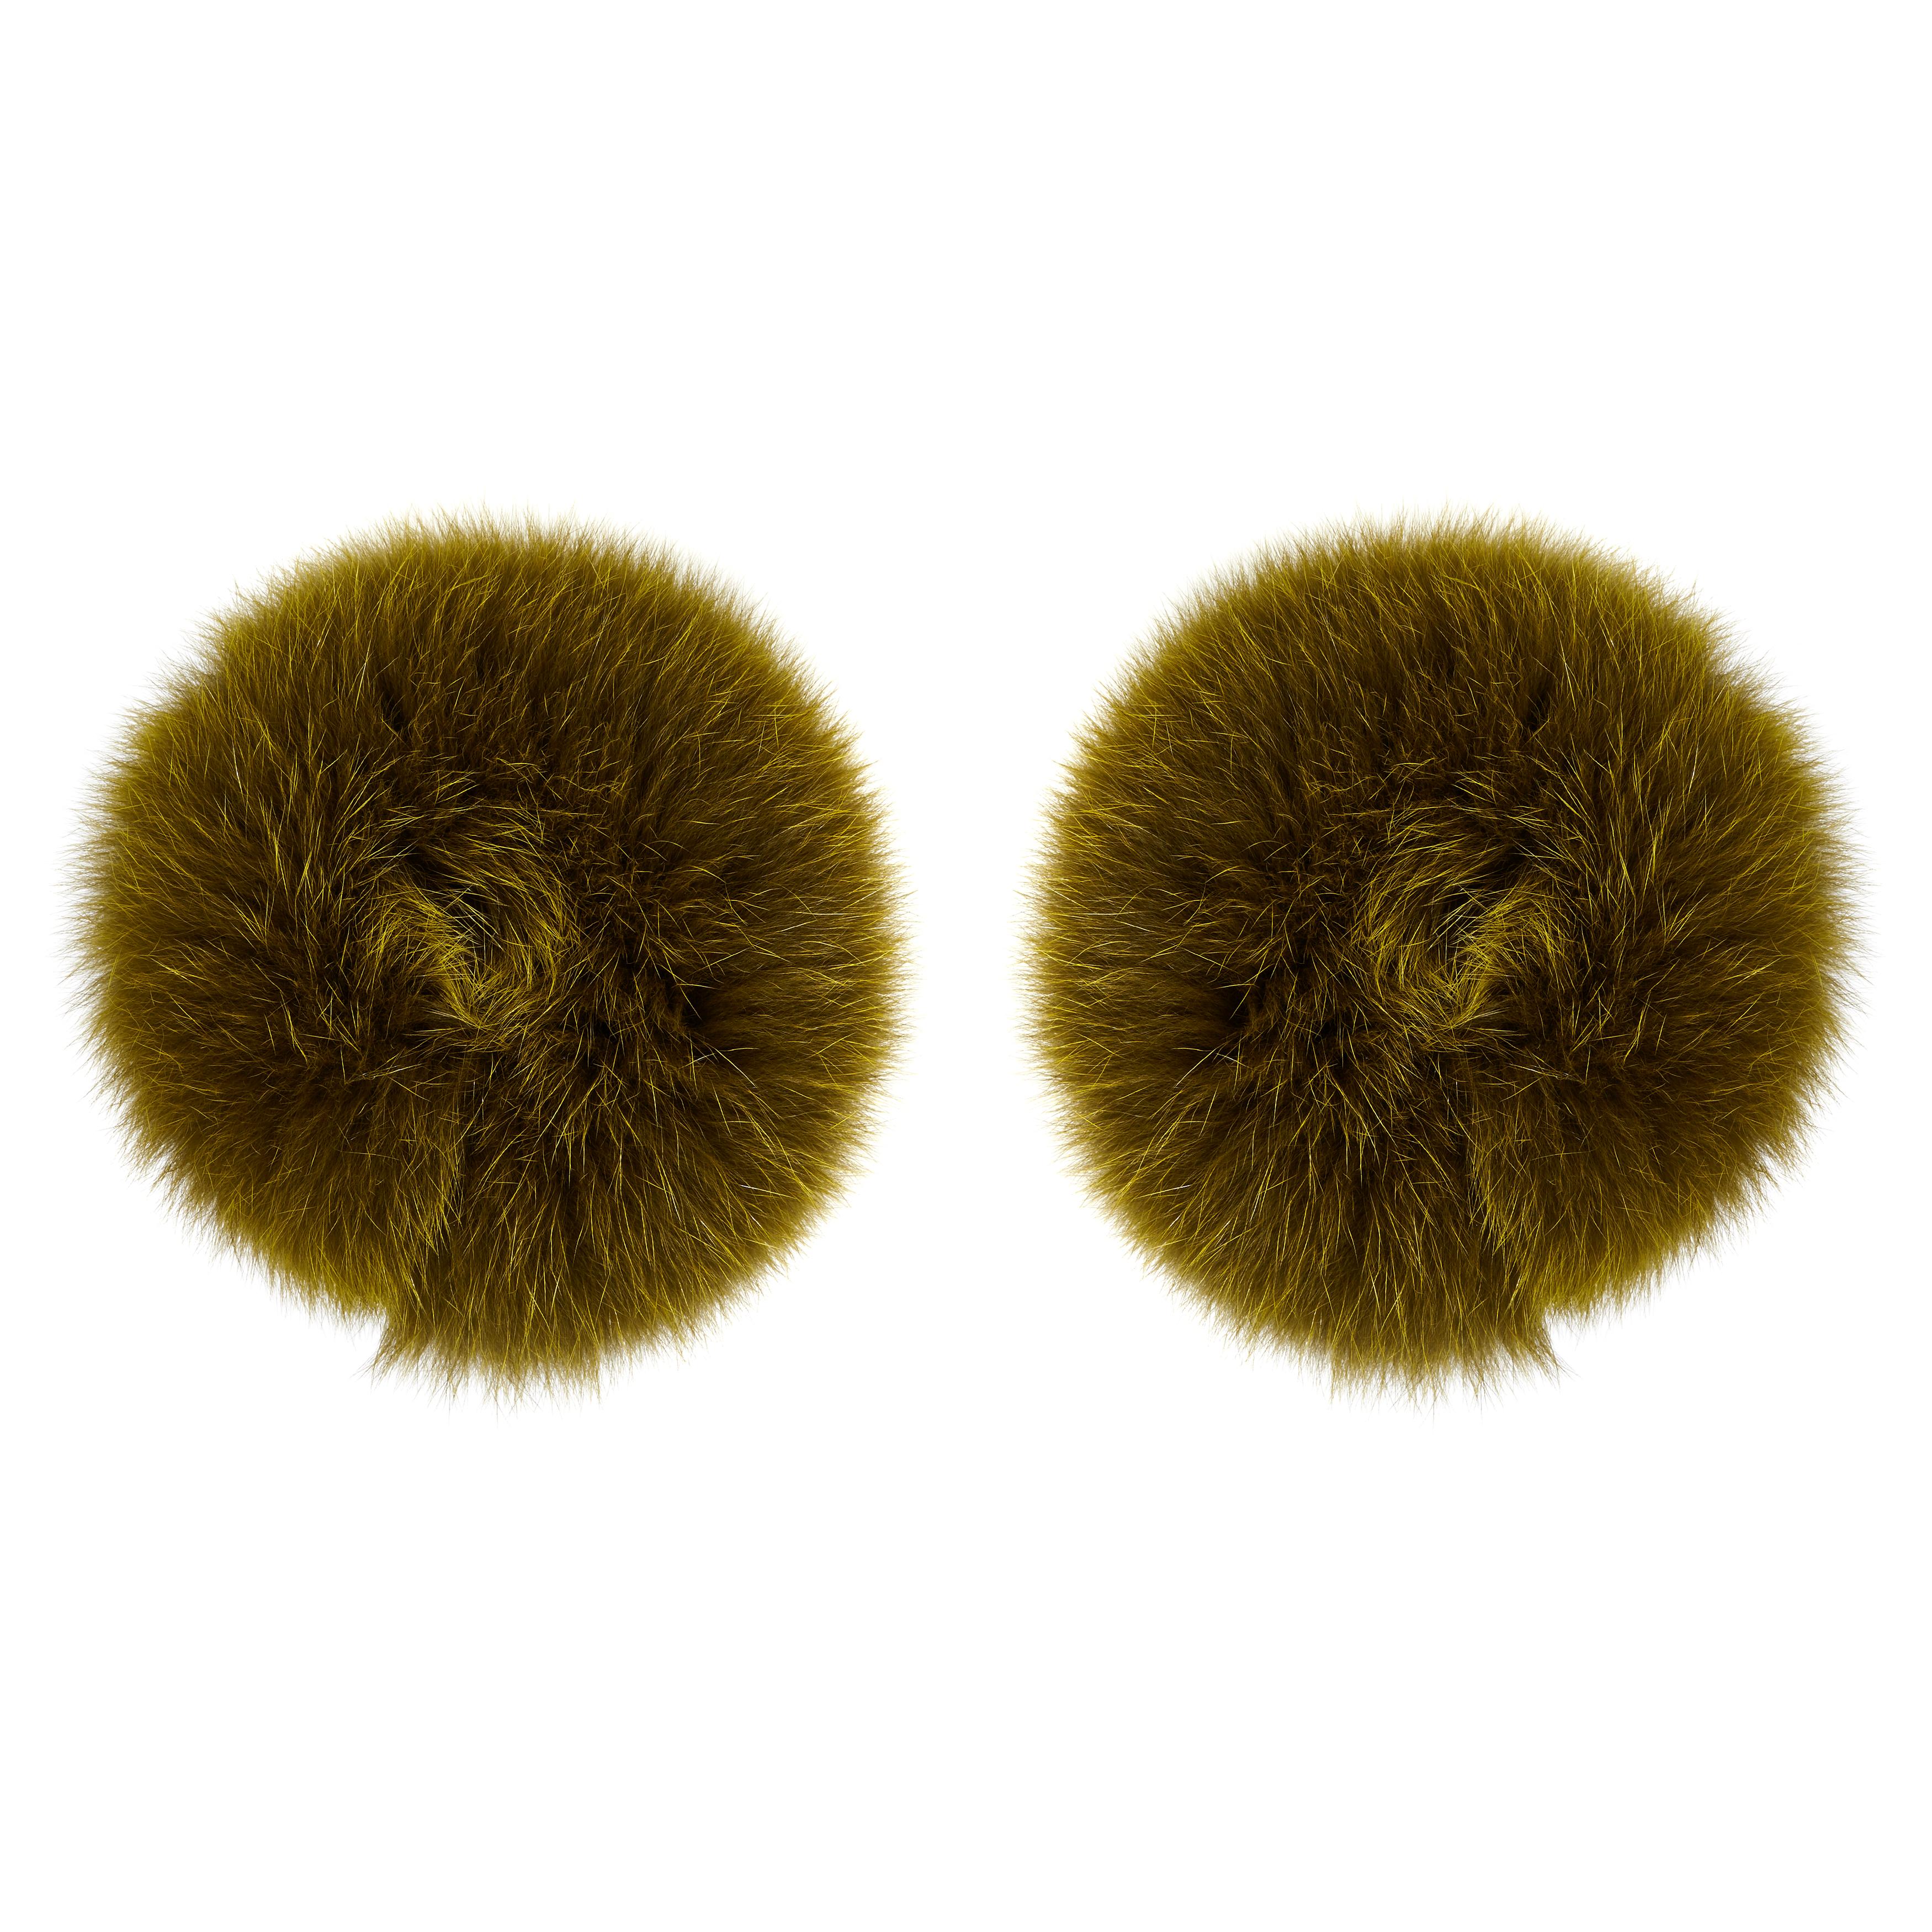 The perfect Christmas gift for someone special.
Verheyen London Snap on Fox Cuffs are the perfect accessory for winter/autumn dressing. Wear over any jumper or coat, these cuffs will jazz up any look and keep you staying cosy with style. 

All fur